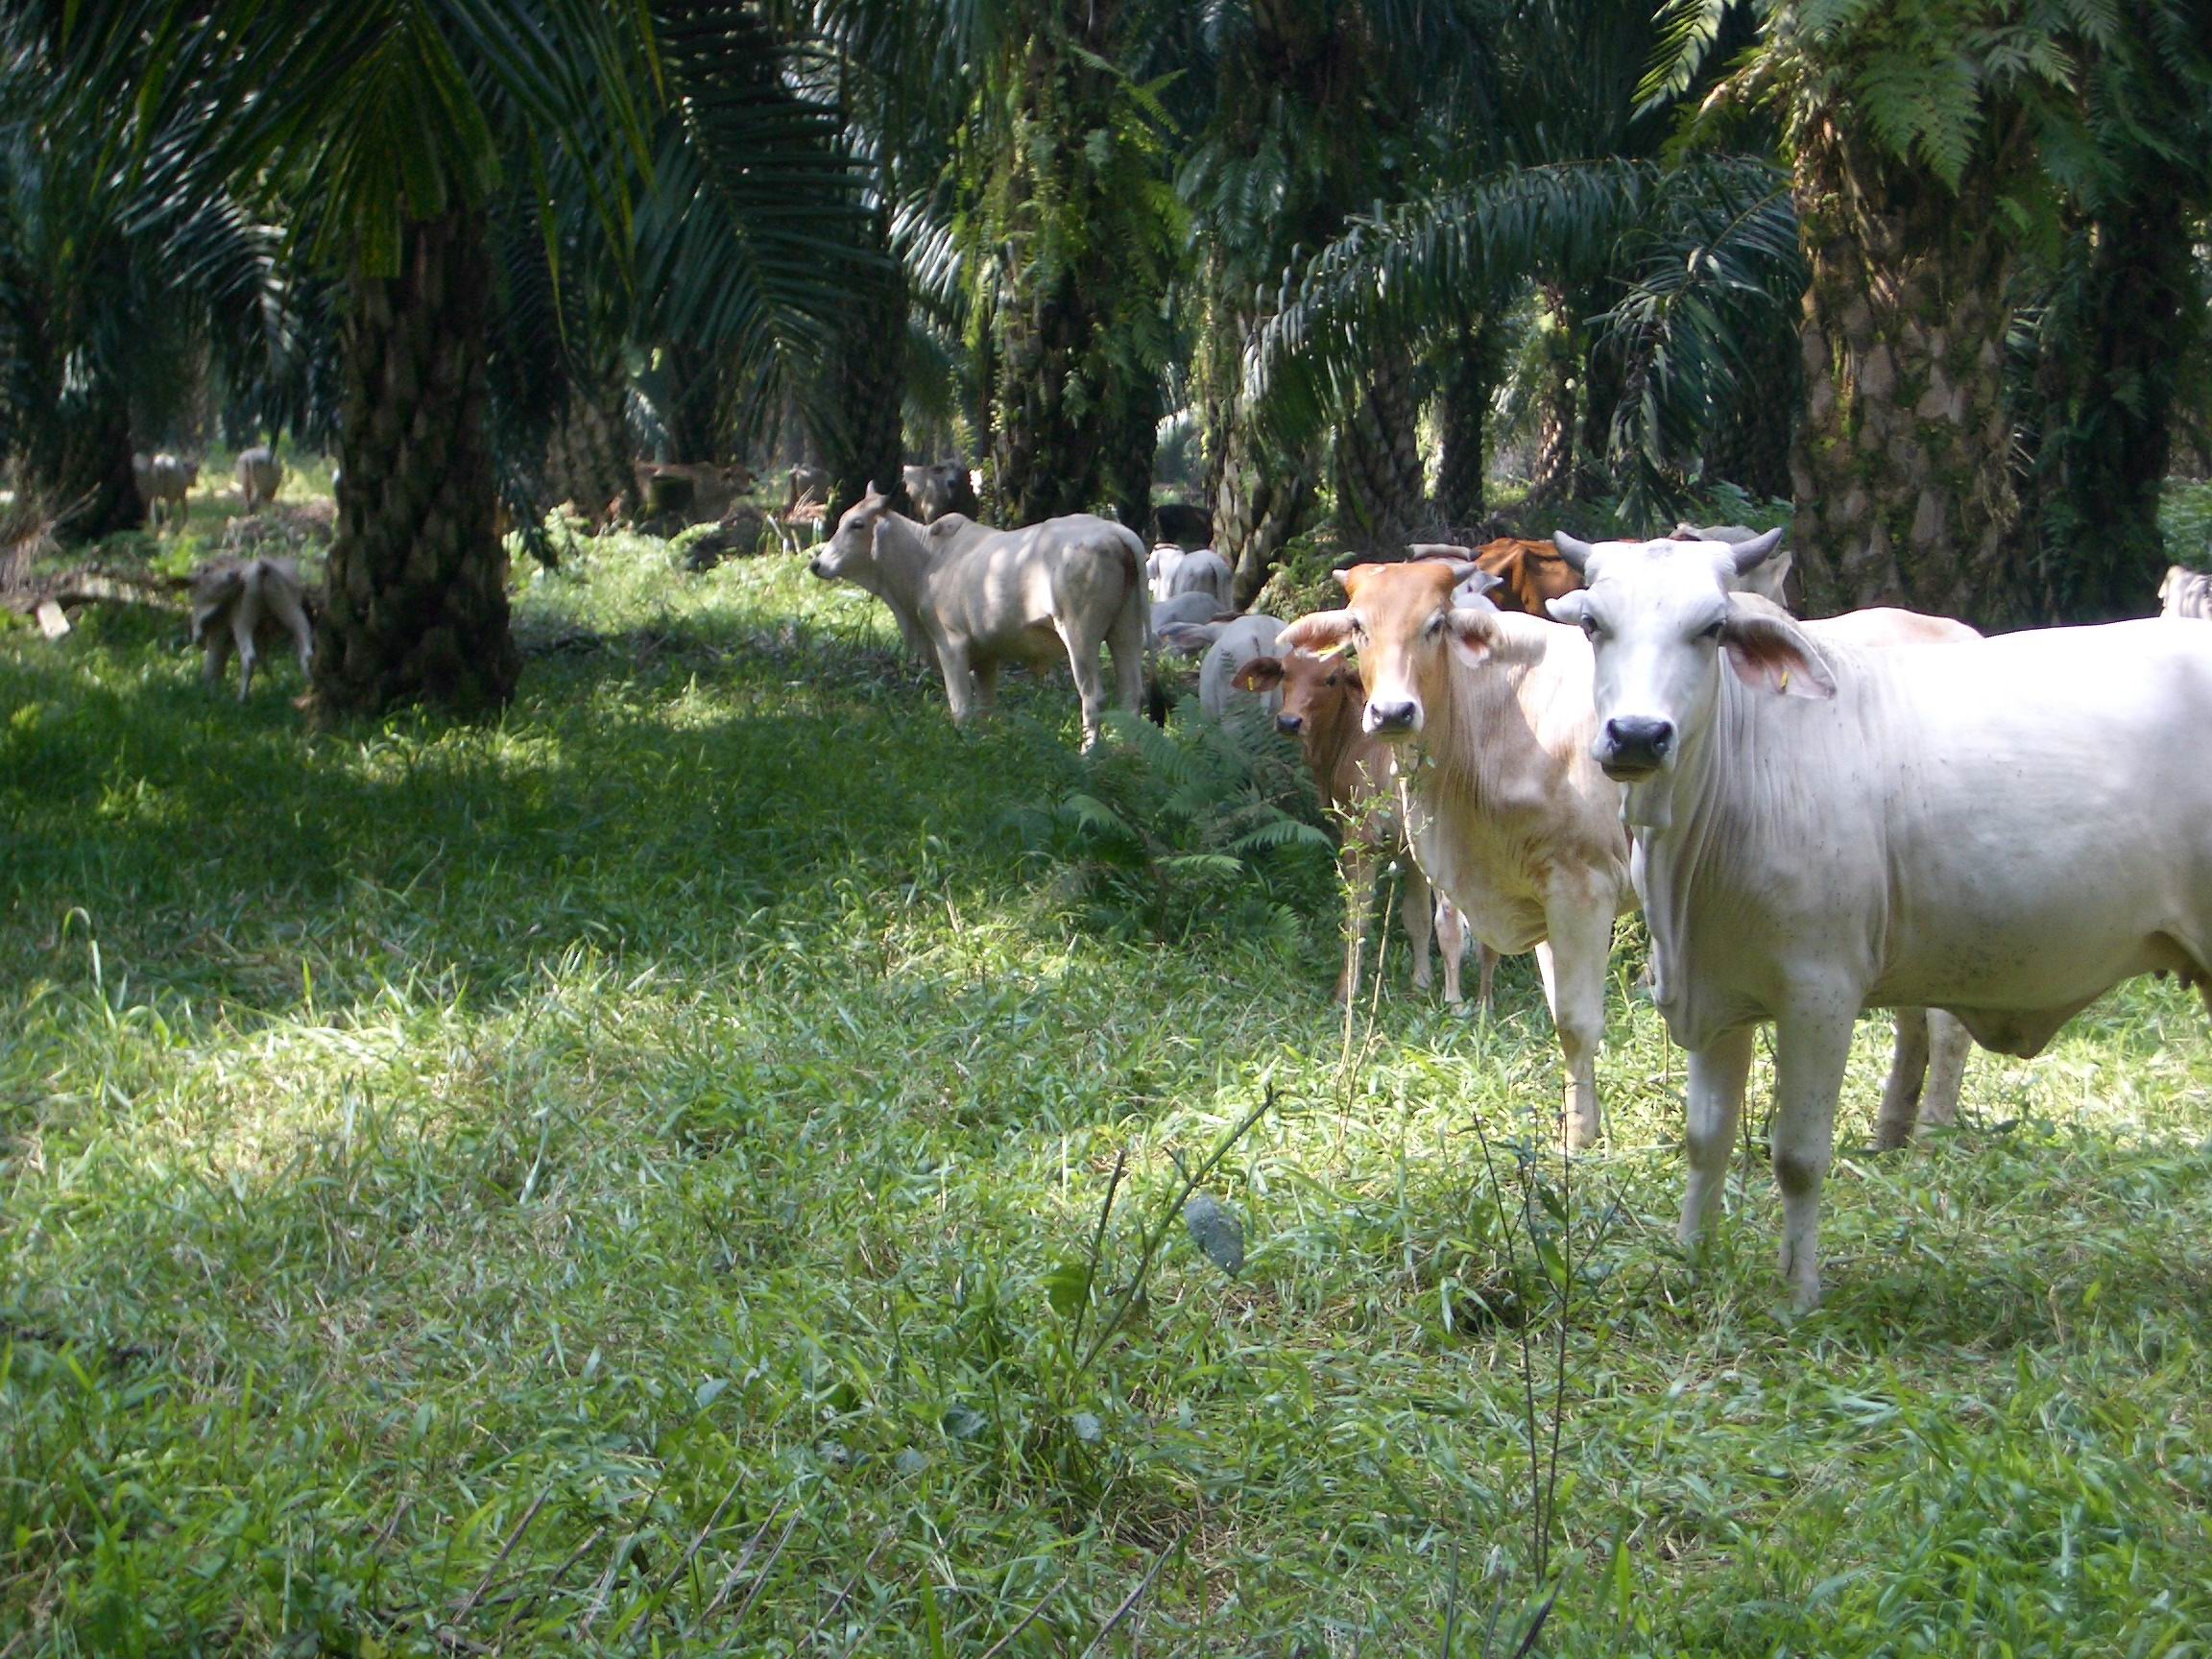 Cows chilling in a palm oil plantation. With grass. Img from SEA Beef Market Report.